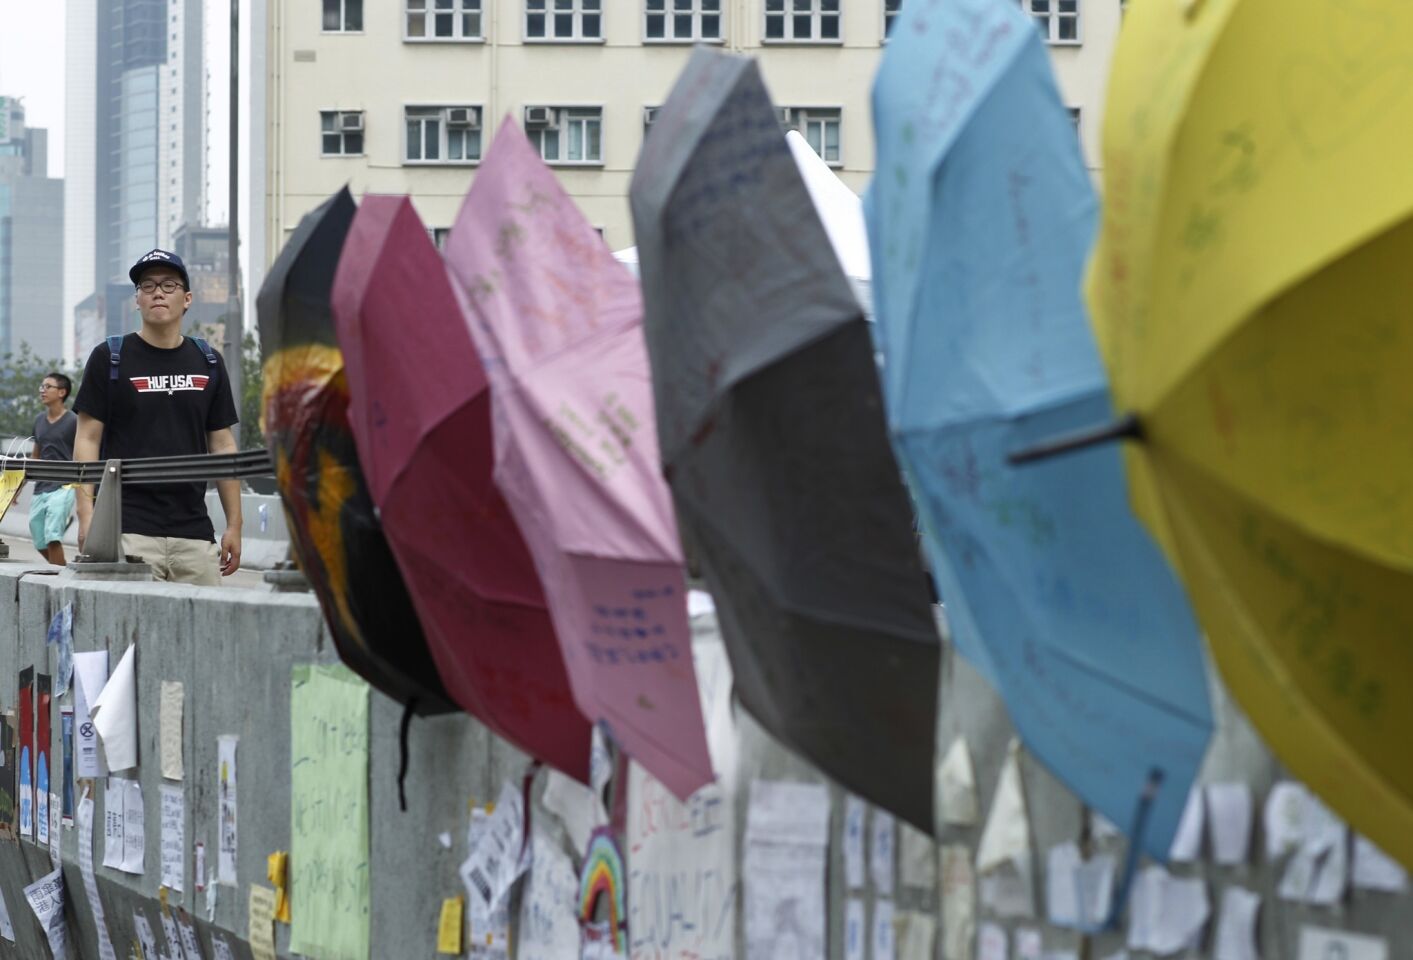 A man passes umbrellas displaying slogans in the protesters' encampment outside the Hong Kong government complex.